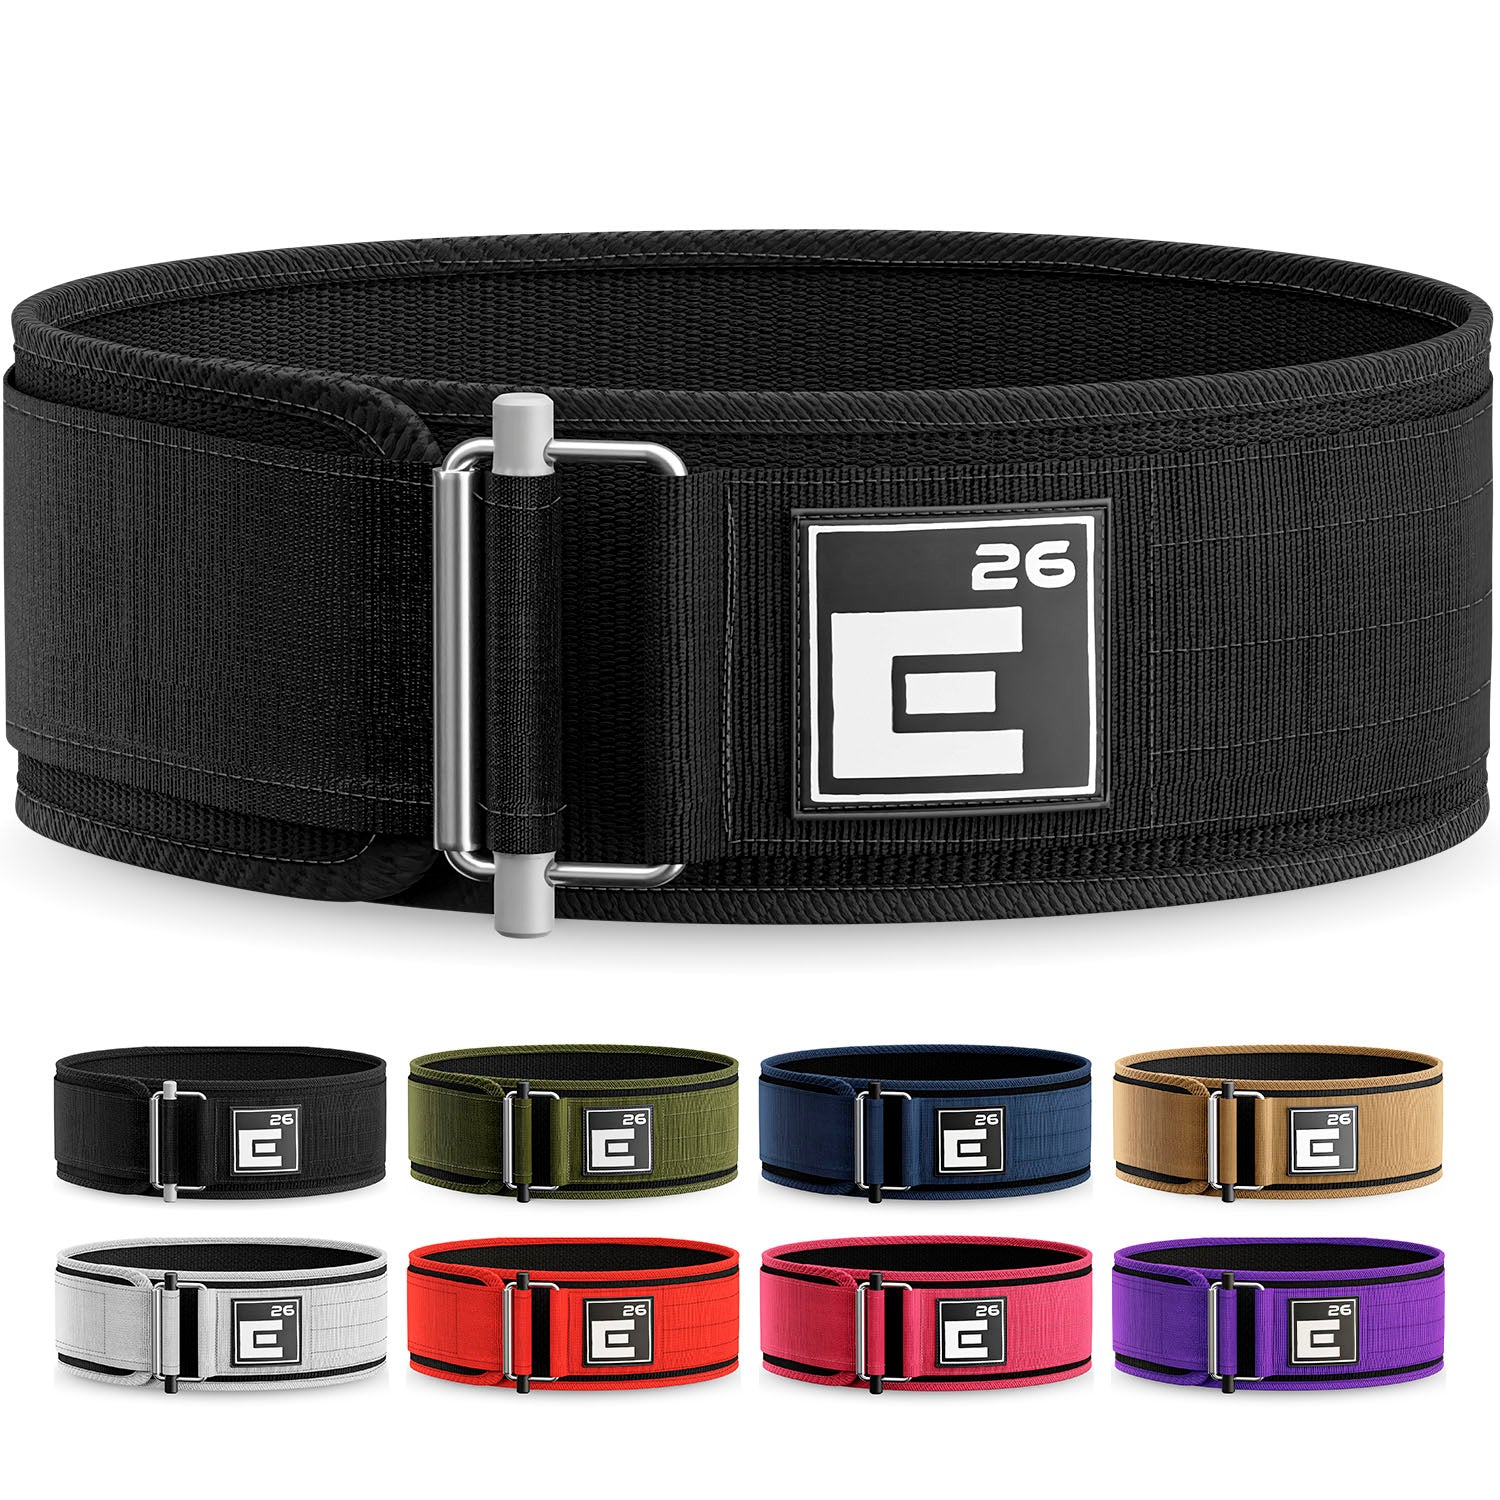 Weight Lifting Straps – Element 26